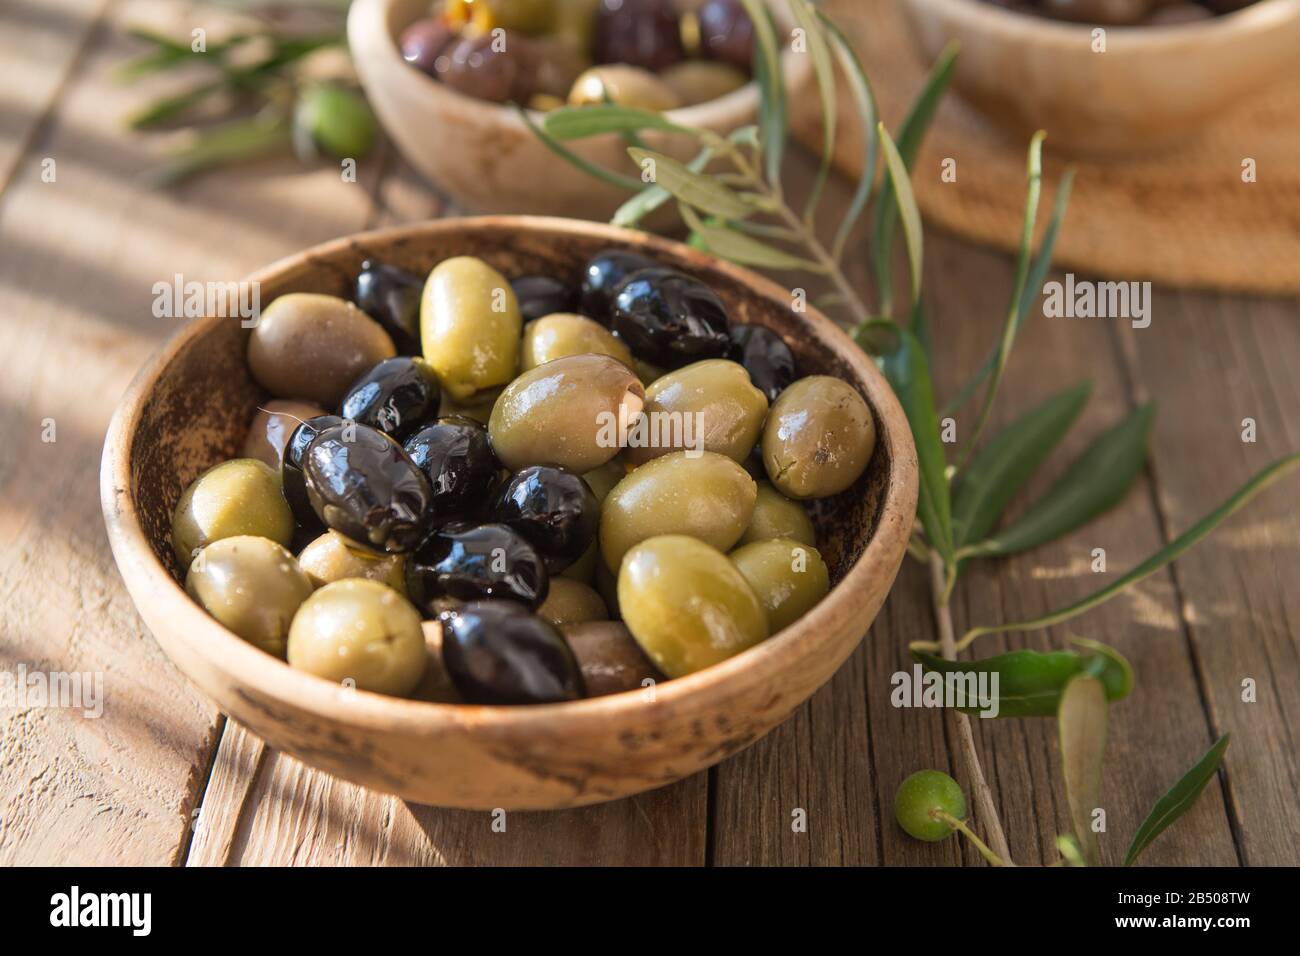 bowls with different kind of olives : green black kalamata olives with olive  oil Stock Photo - Alamy